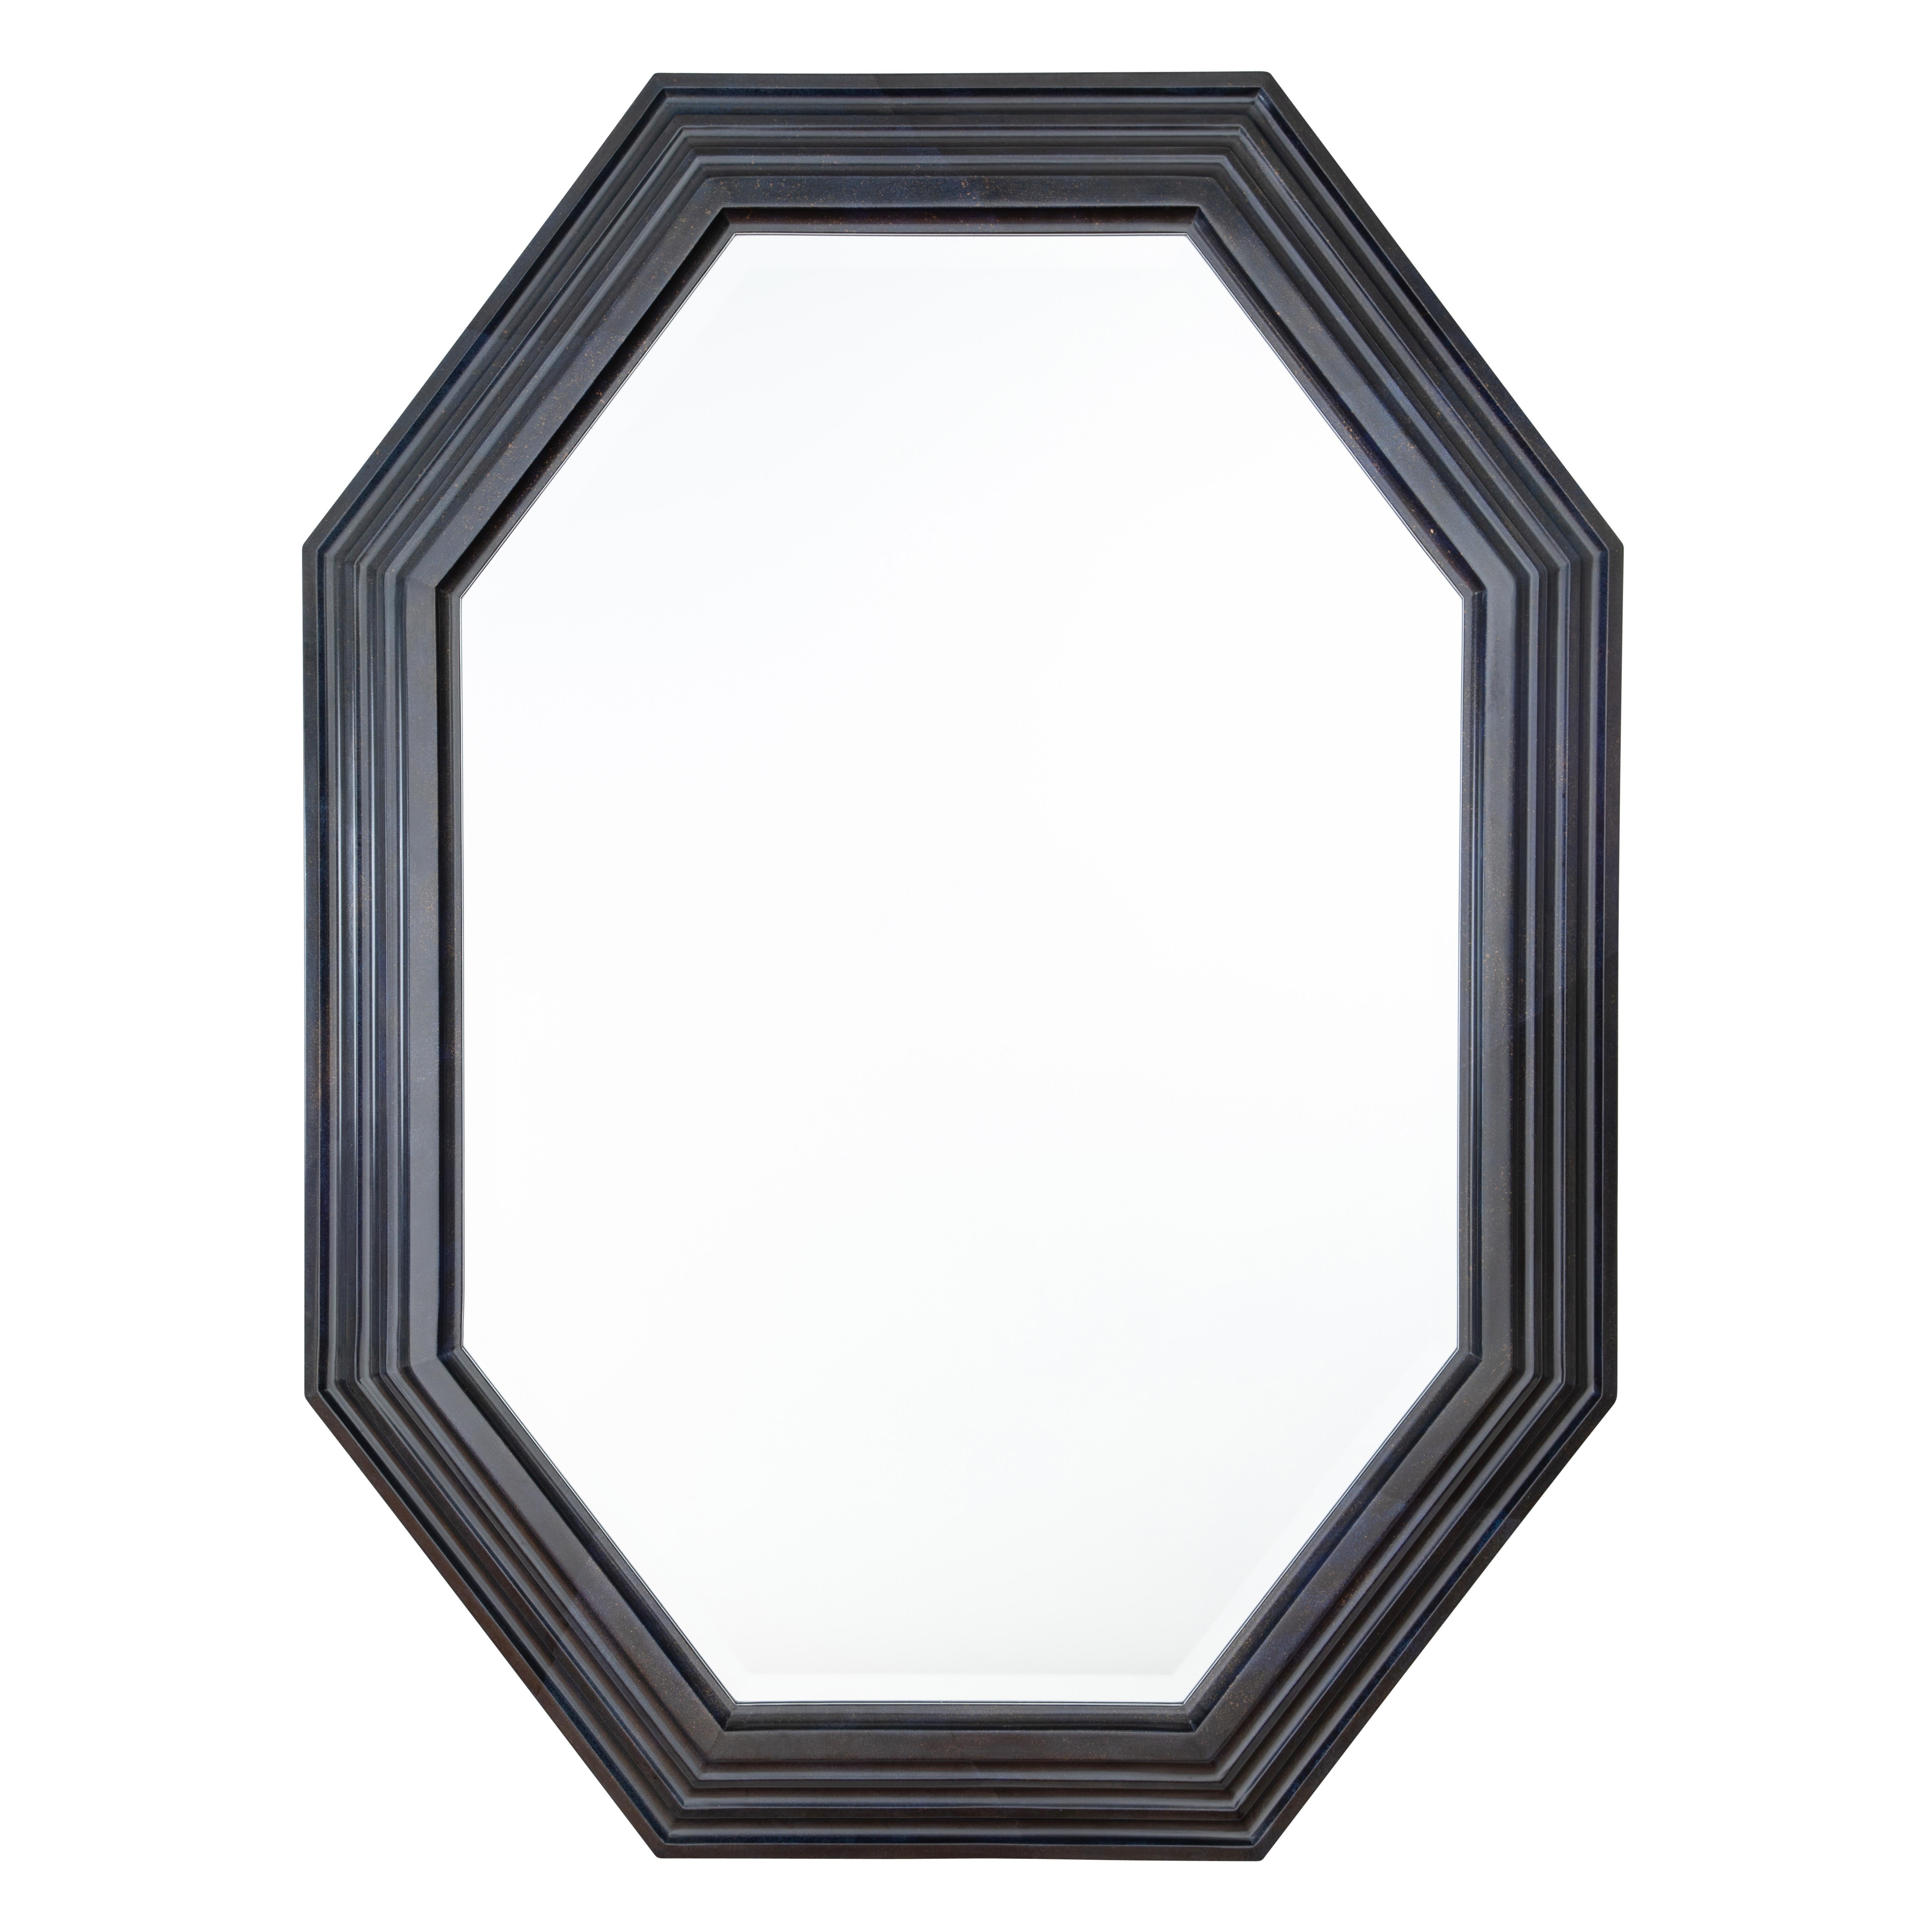 Karl Springer Octagonal Mirror in a Faux-Lapis Lacquer Finish, circa 1989